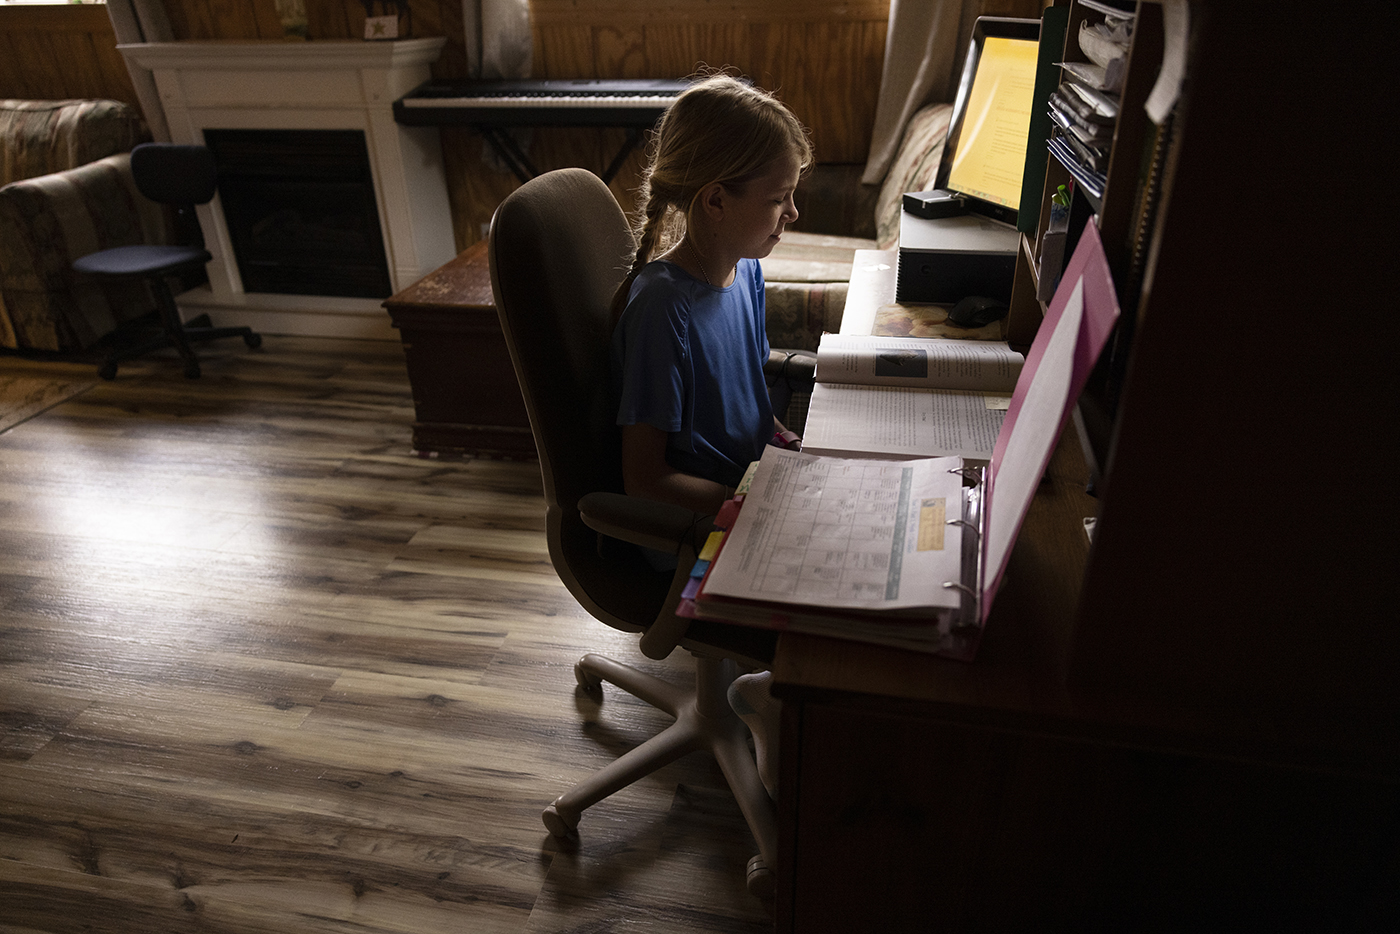 Bernadette Clements, 11, studies at her family home